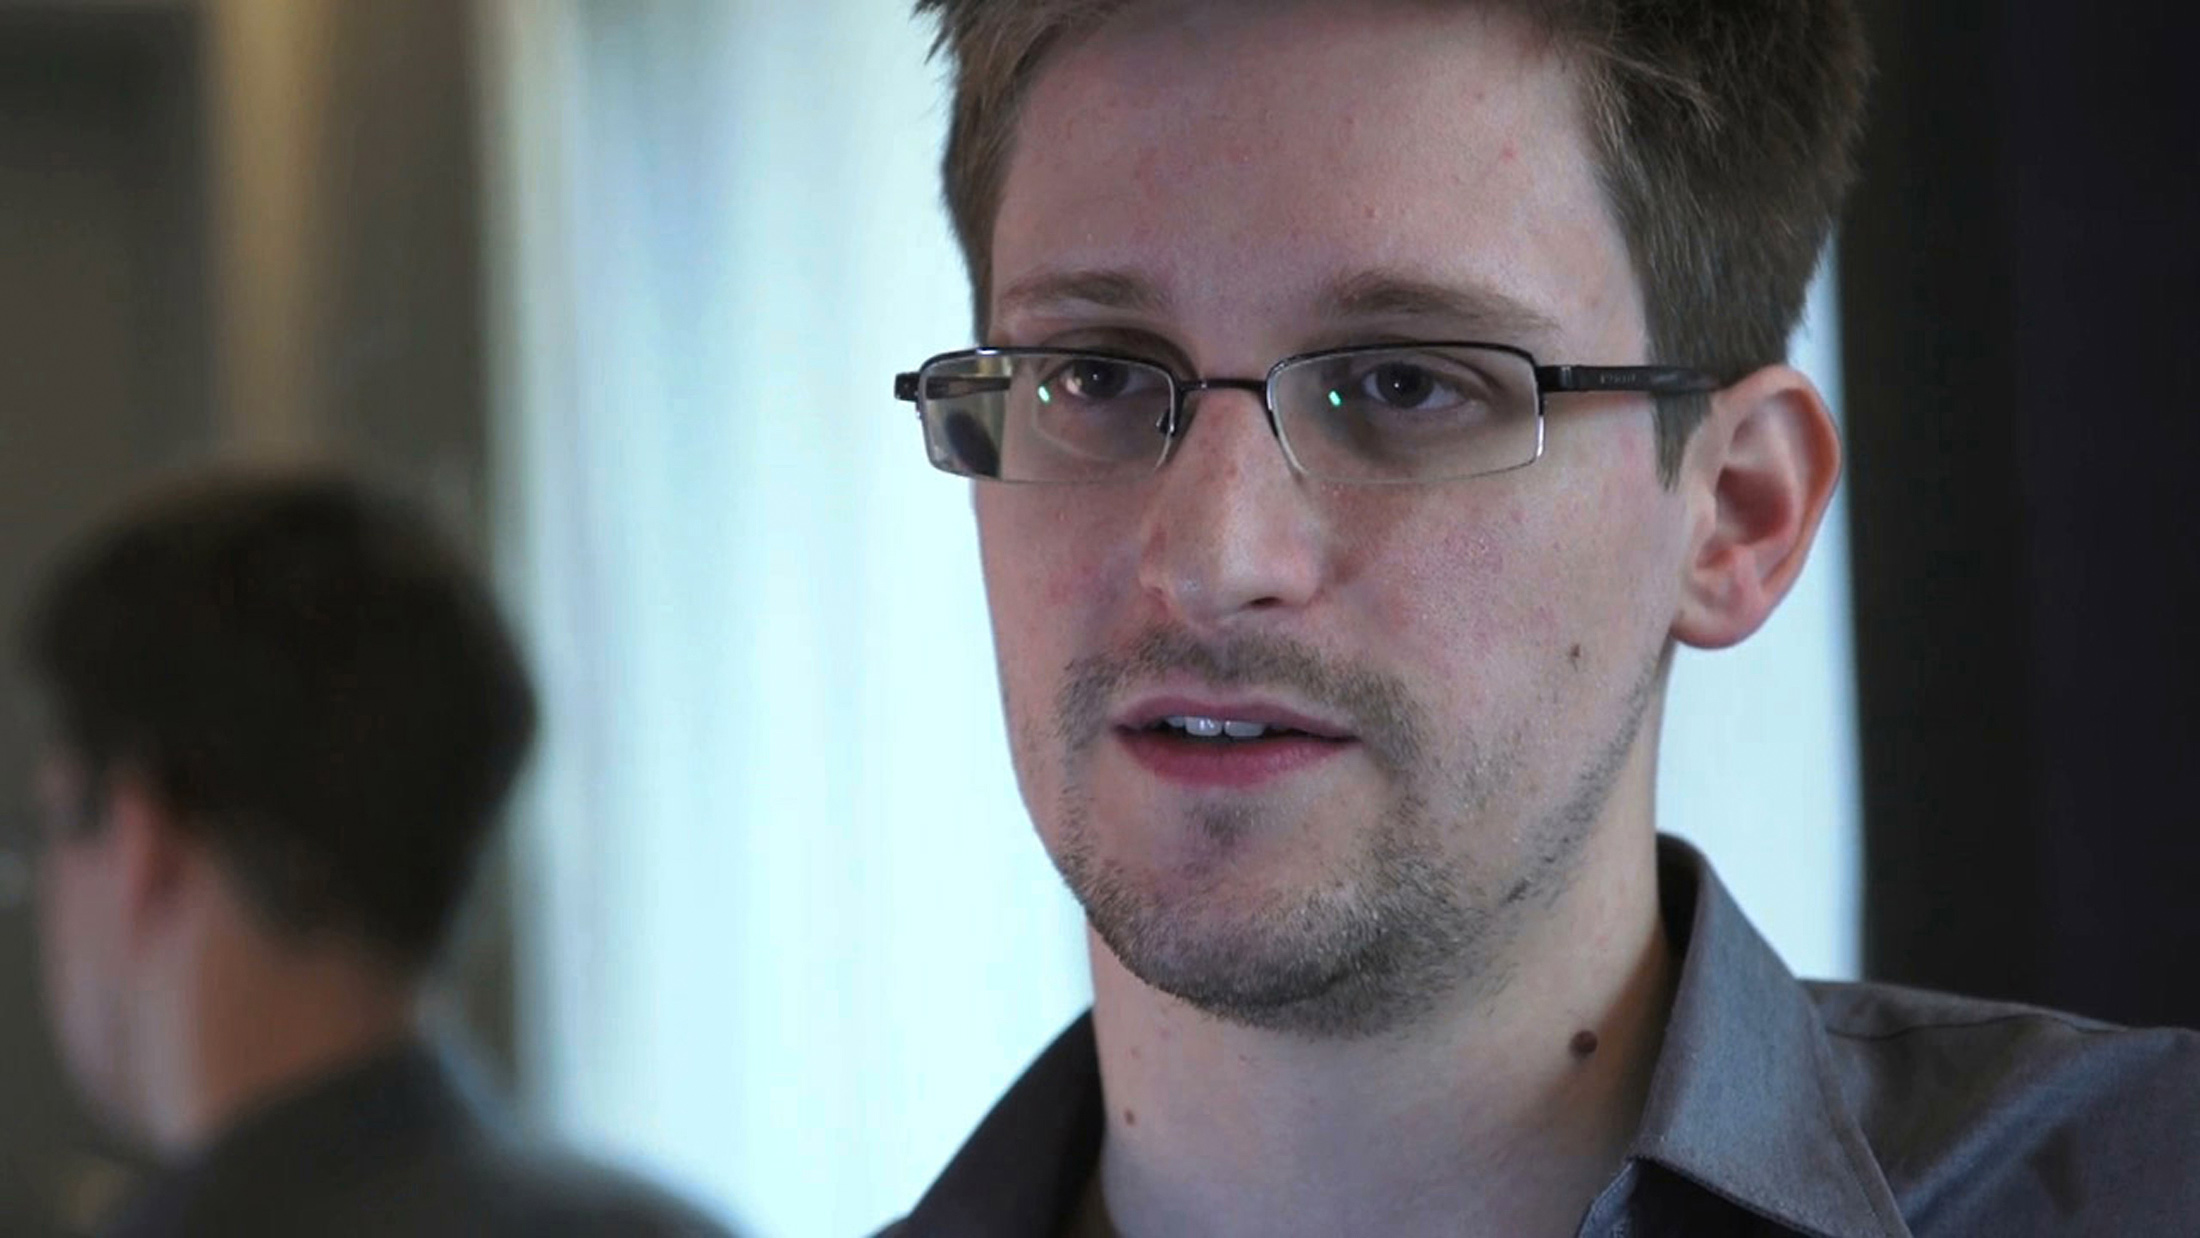 NSA says Snowden took documents from internal website: report